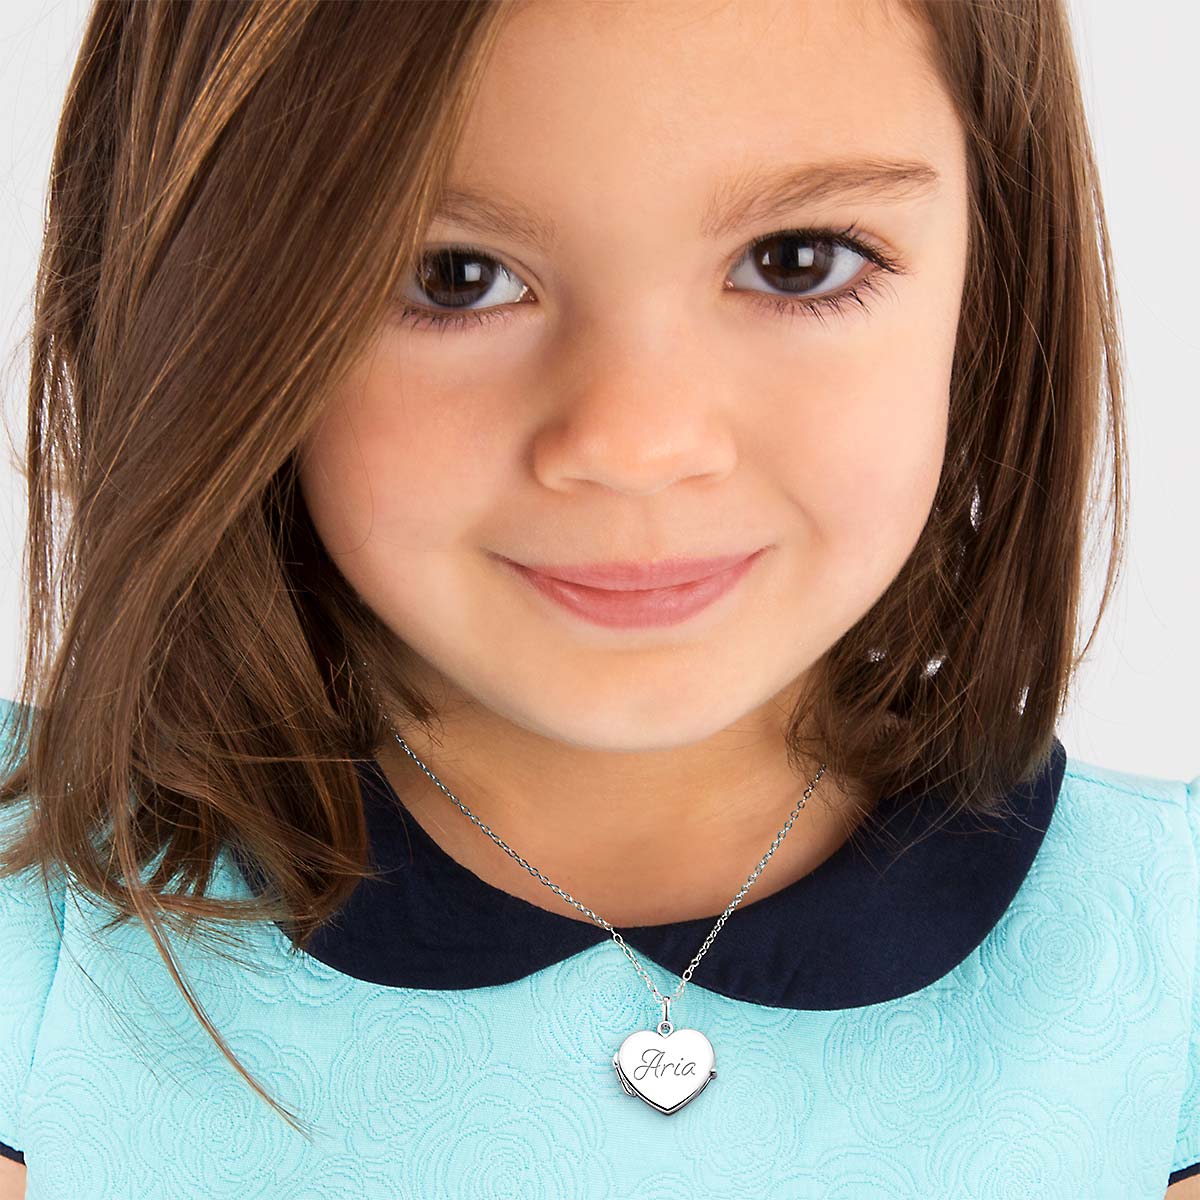 Personalized 14K Gold and Silver Necklaces for Kids